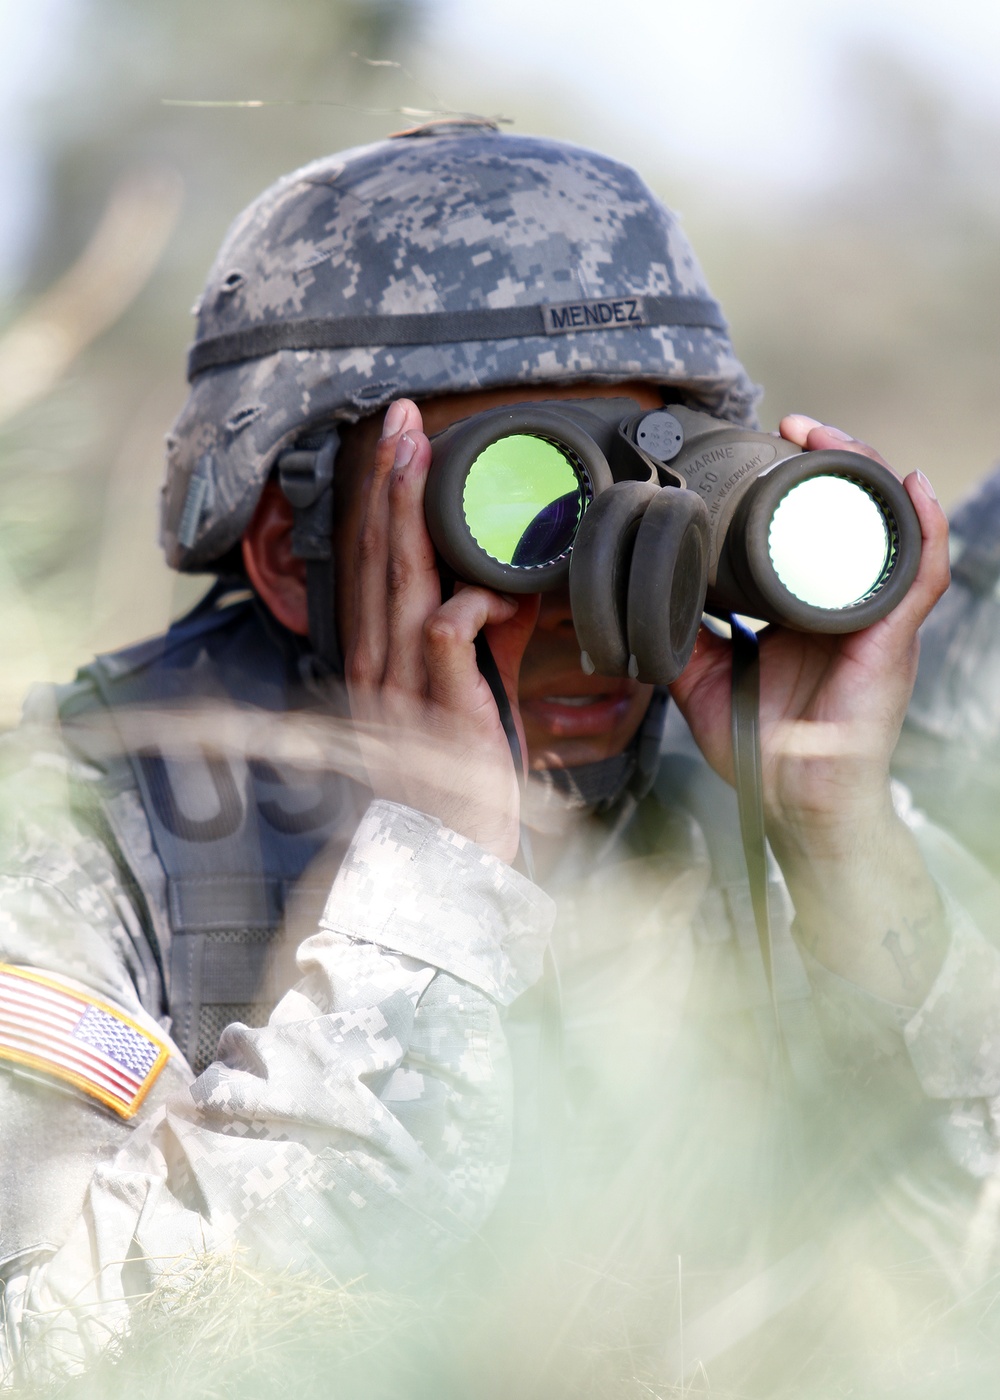 Spc. Roberto Mendez observes enemy at 2014 USAREUR Best Warrior Competition